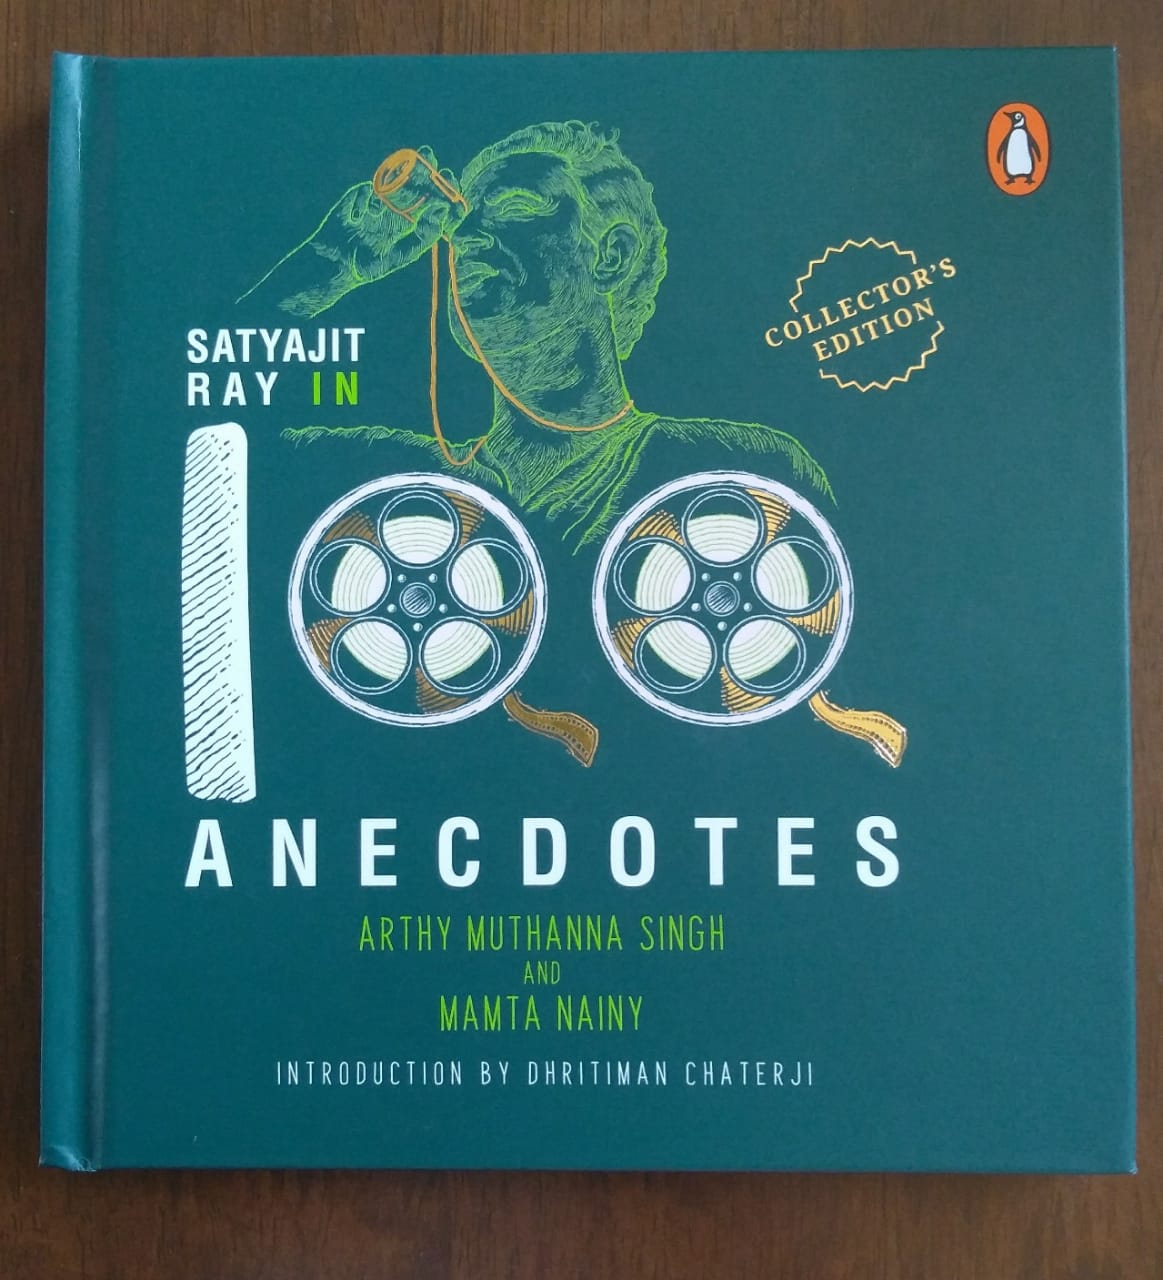 Review: Satyajit Ray In 100 Anecdotes: A Collector’s Edition